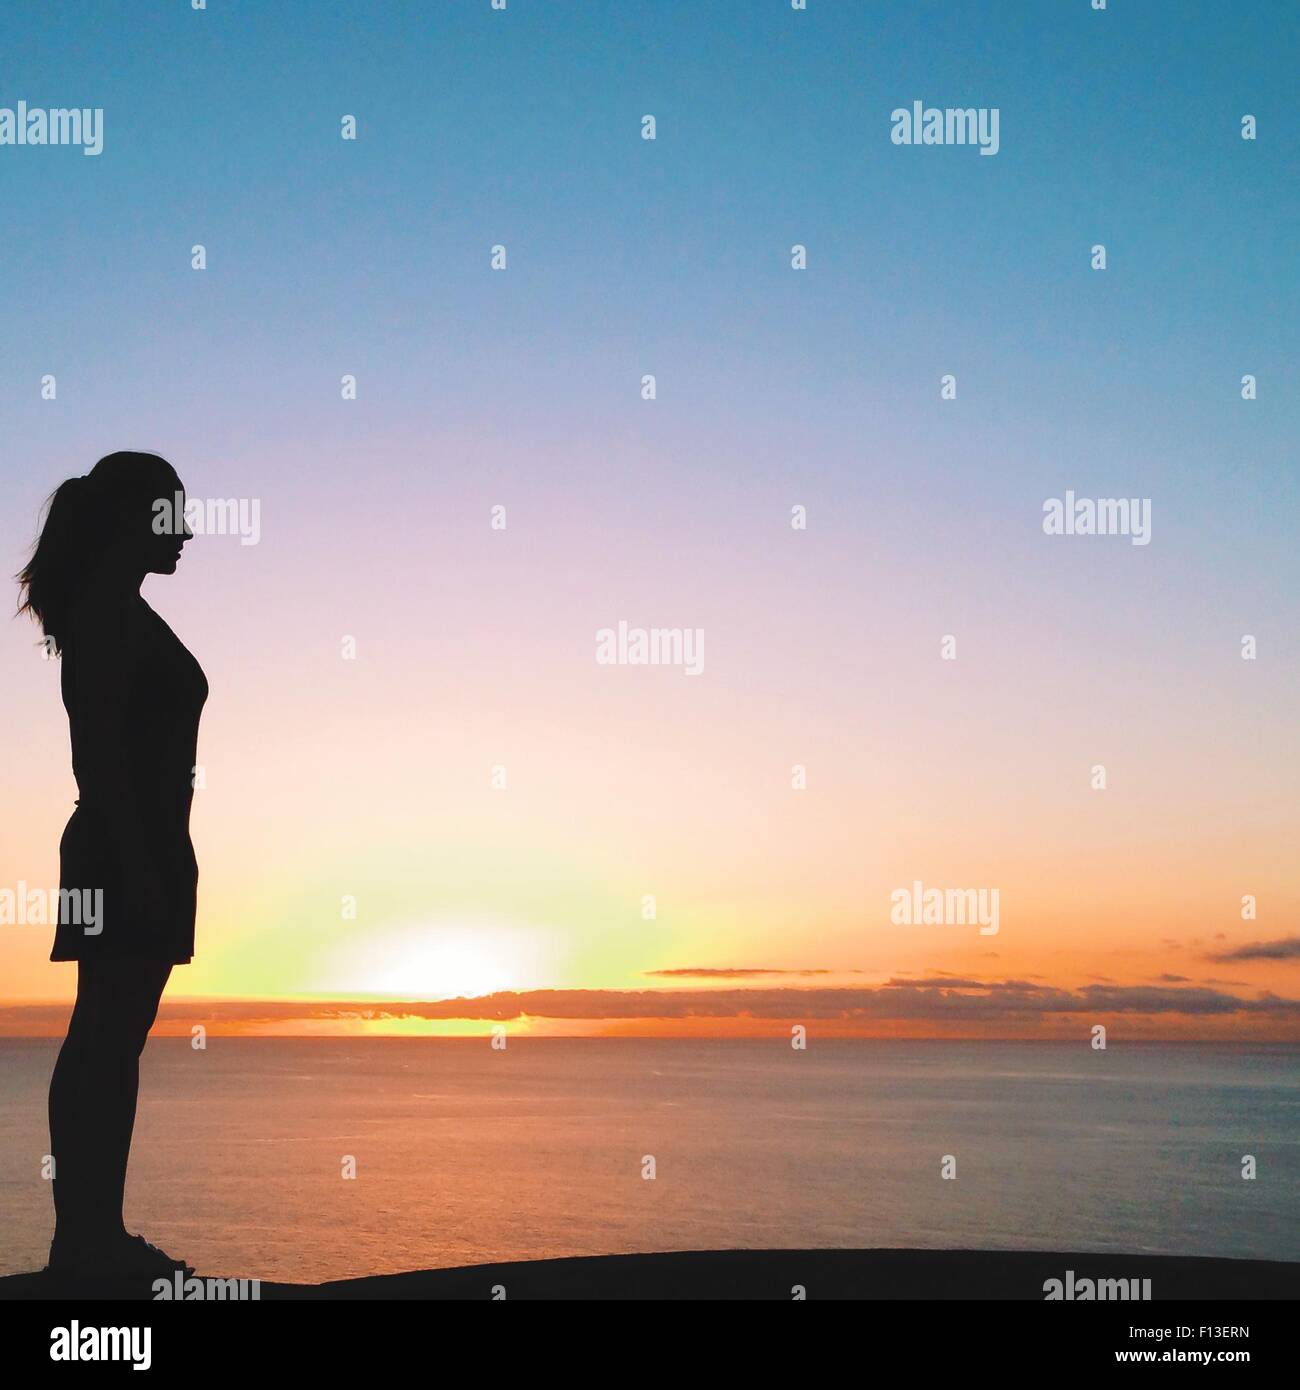 Silhouette of a woman looking out to sea at sunset, Tenerife, Canary Islands, Spain Stock Photo